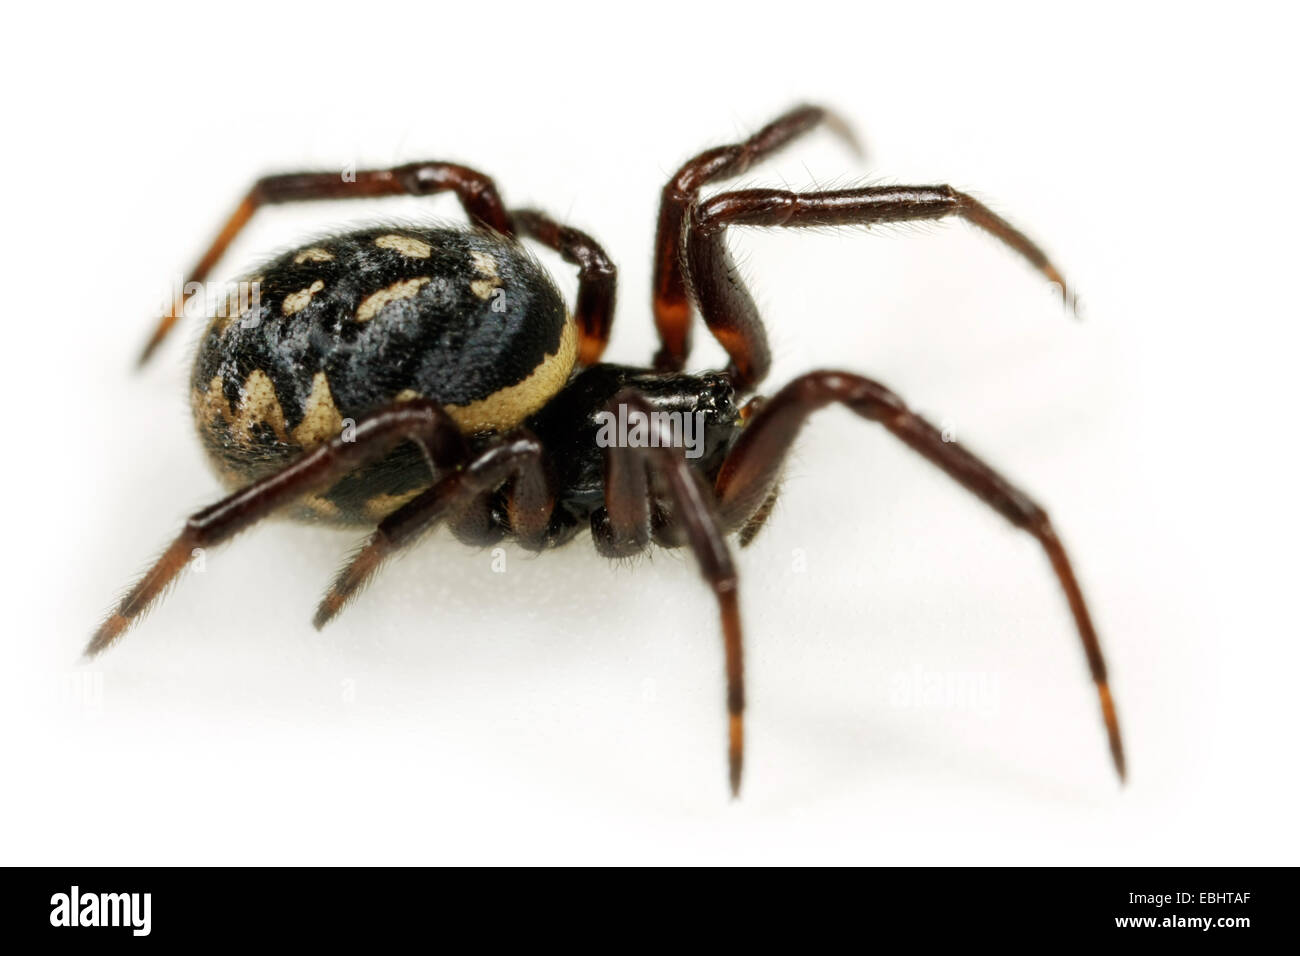 A female comb-footed spider (Steatoda albomaculata), on white background. Comb-footed spiders (or Cobweb weavers) are part of the family Theridiidae. Stock Photo